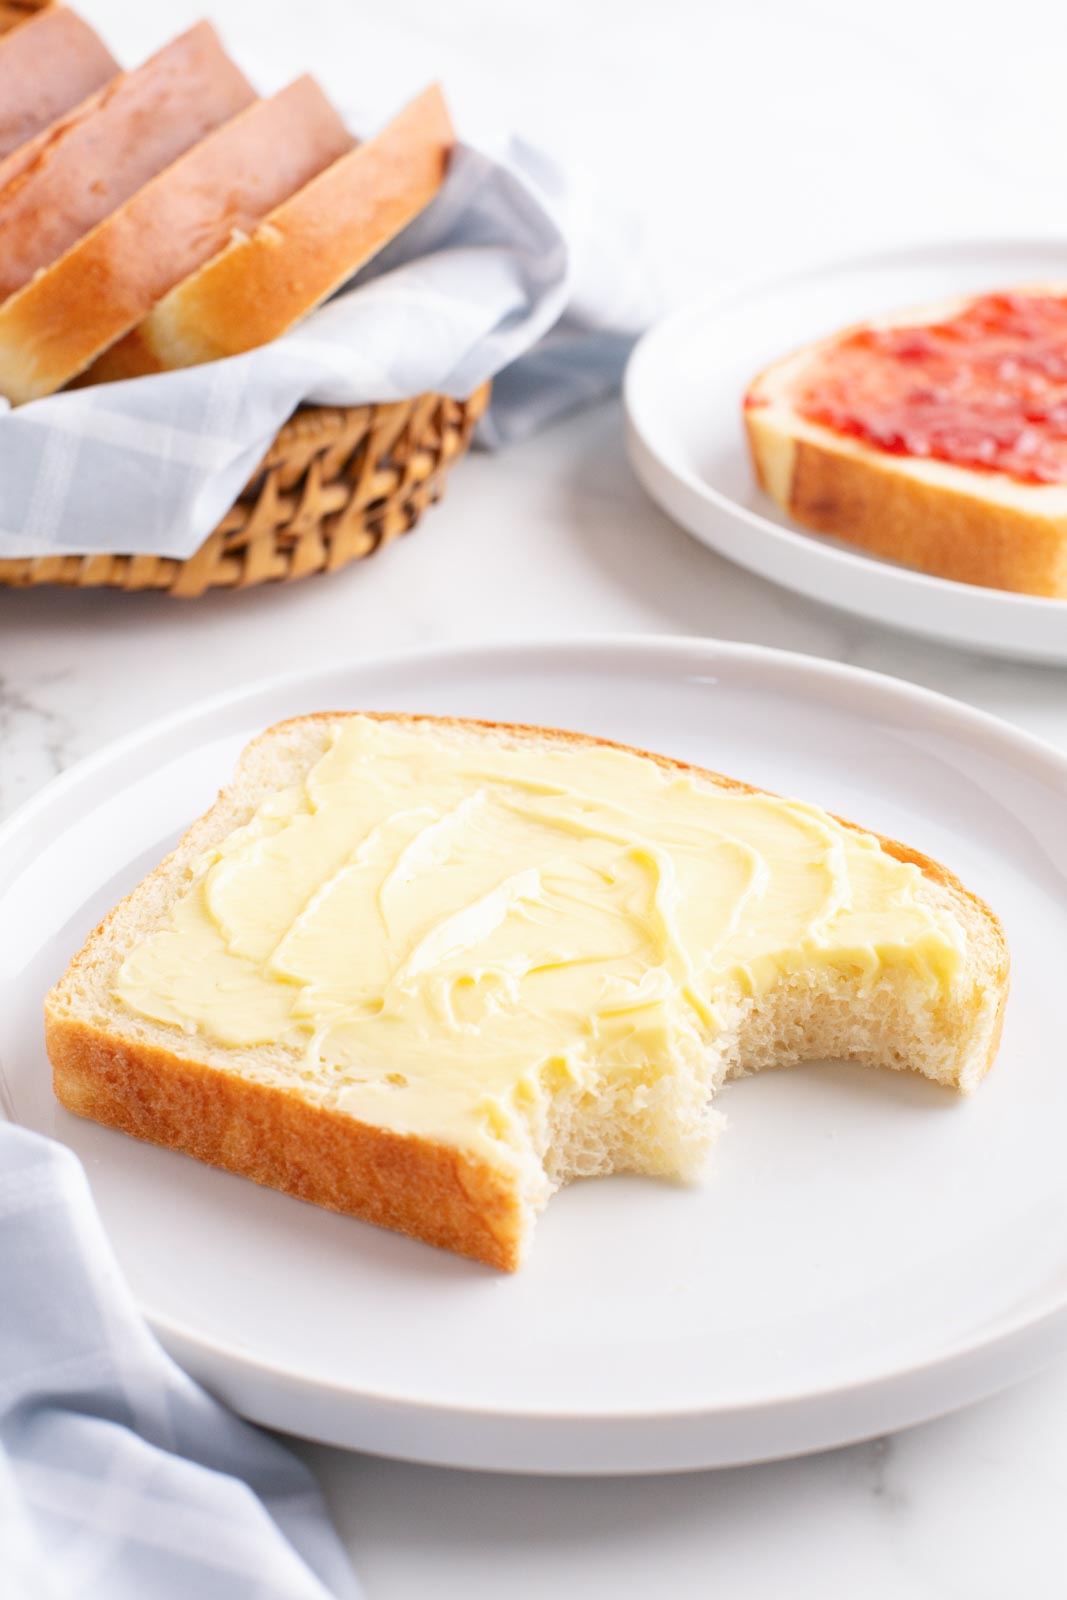 A slice of buttered mashed potato bread on a plate.